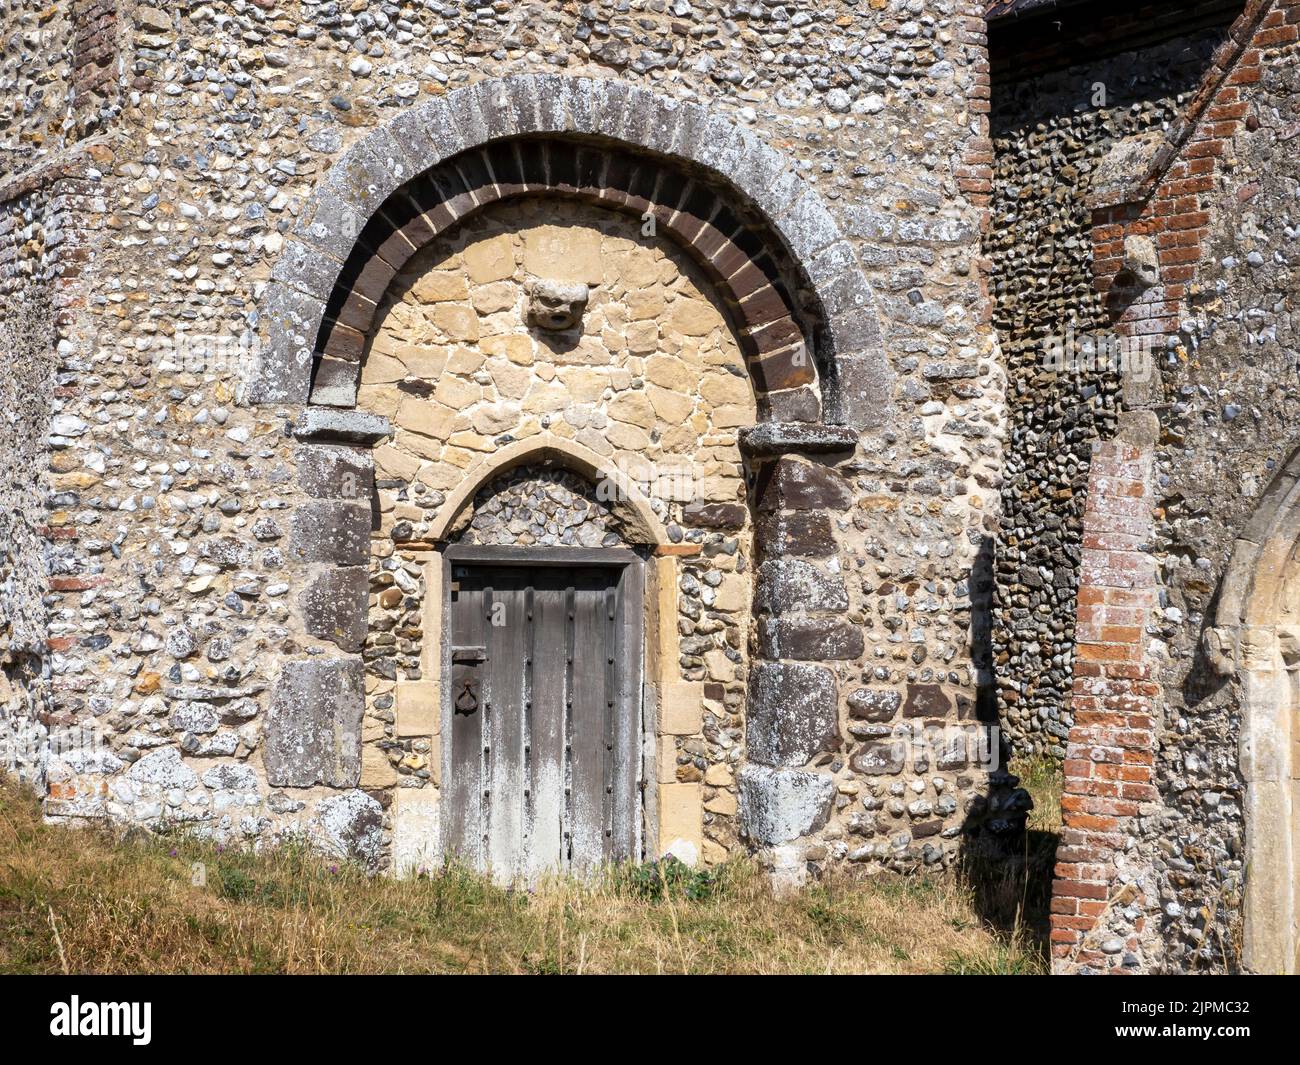 St Andrew church at Little Snoring, Norfolk, UK with a detatched Saxon round tower. Stock Photo